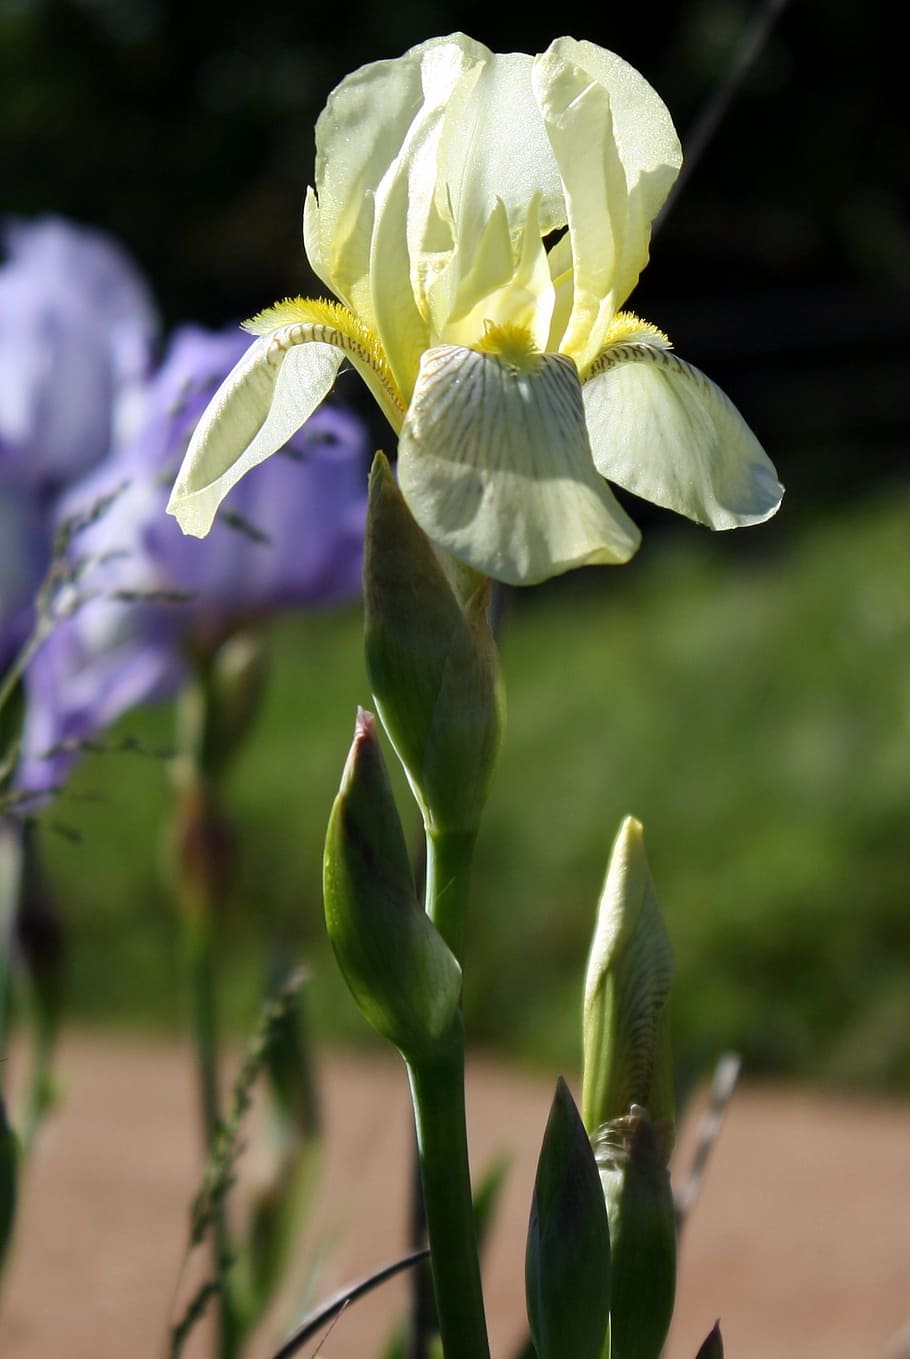 iris, floral, flower, flowering plant, plant, growth, beauty in nature, fragility, vulnerability, petal